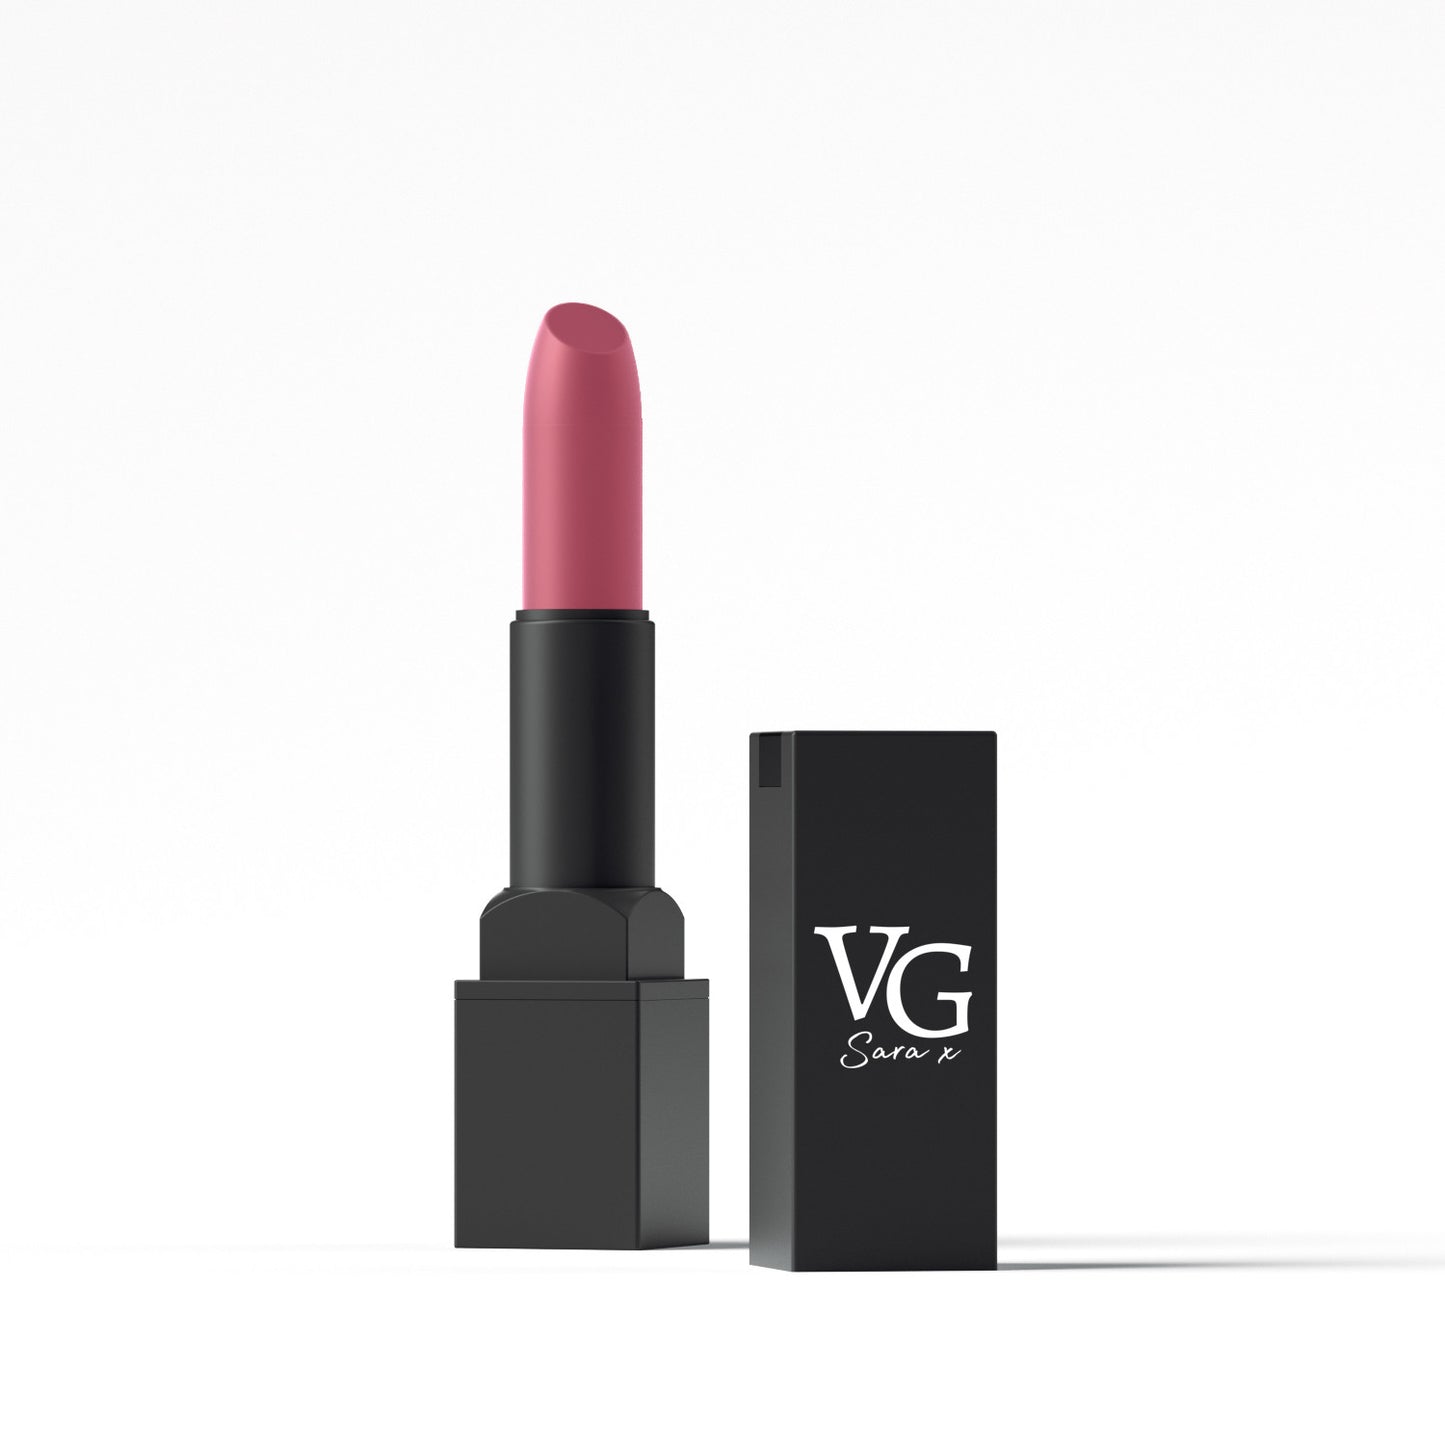 VG long lasting lipstick with the color visible